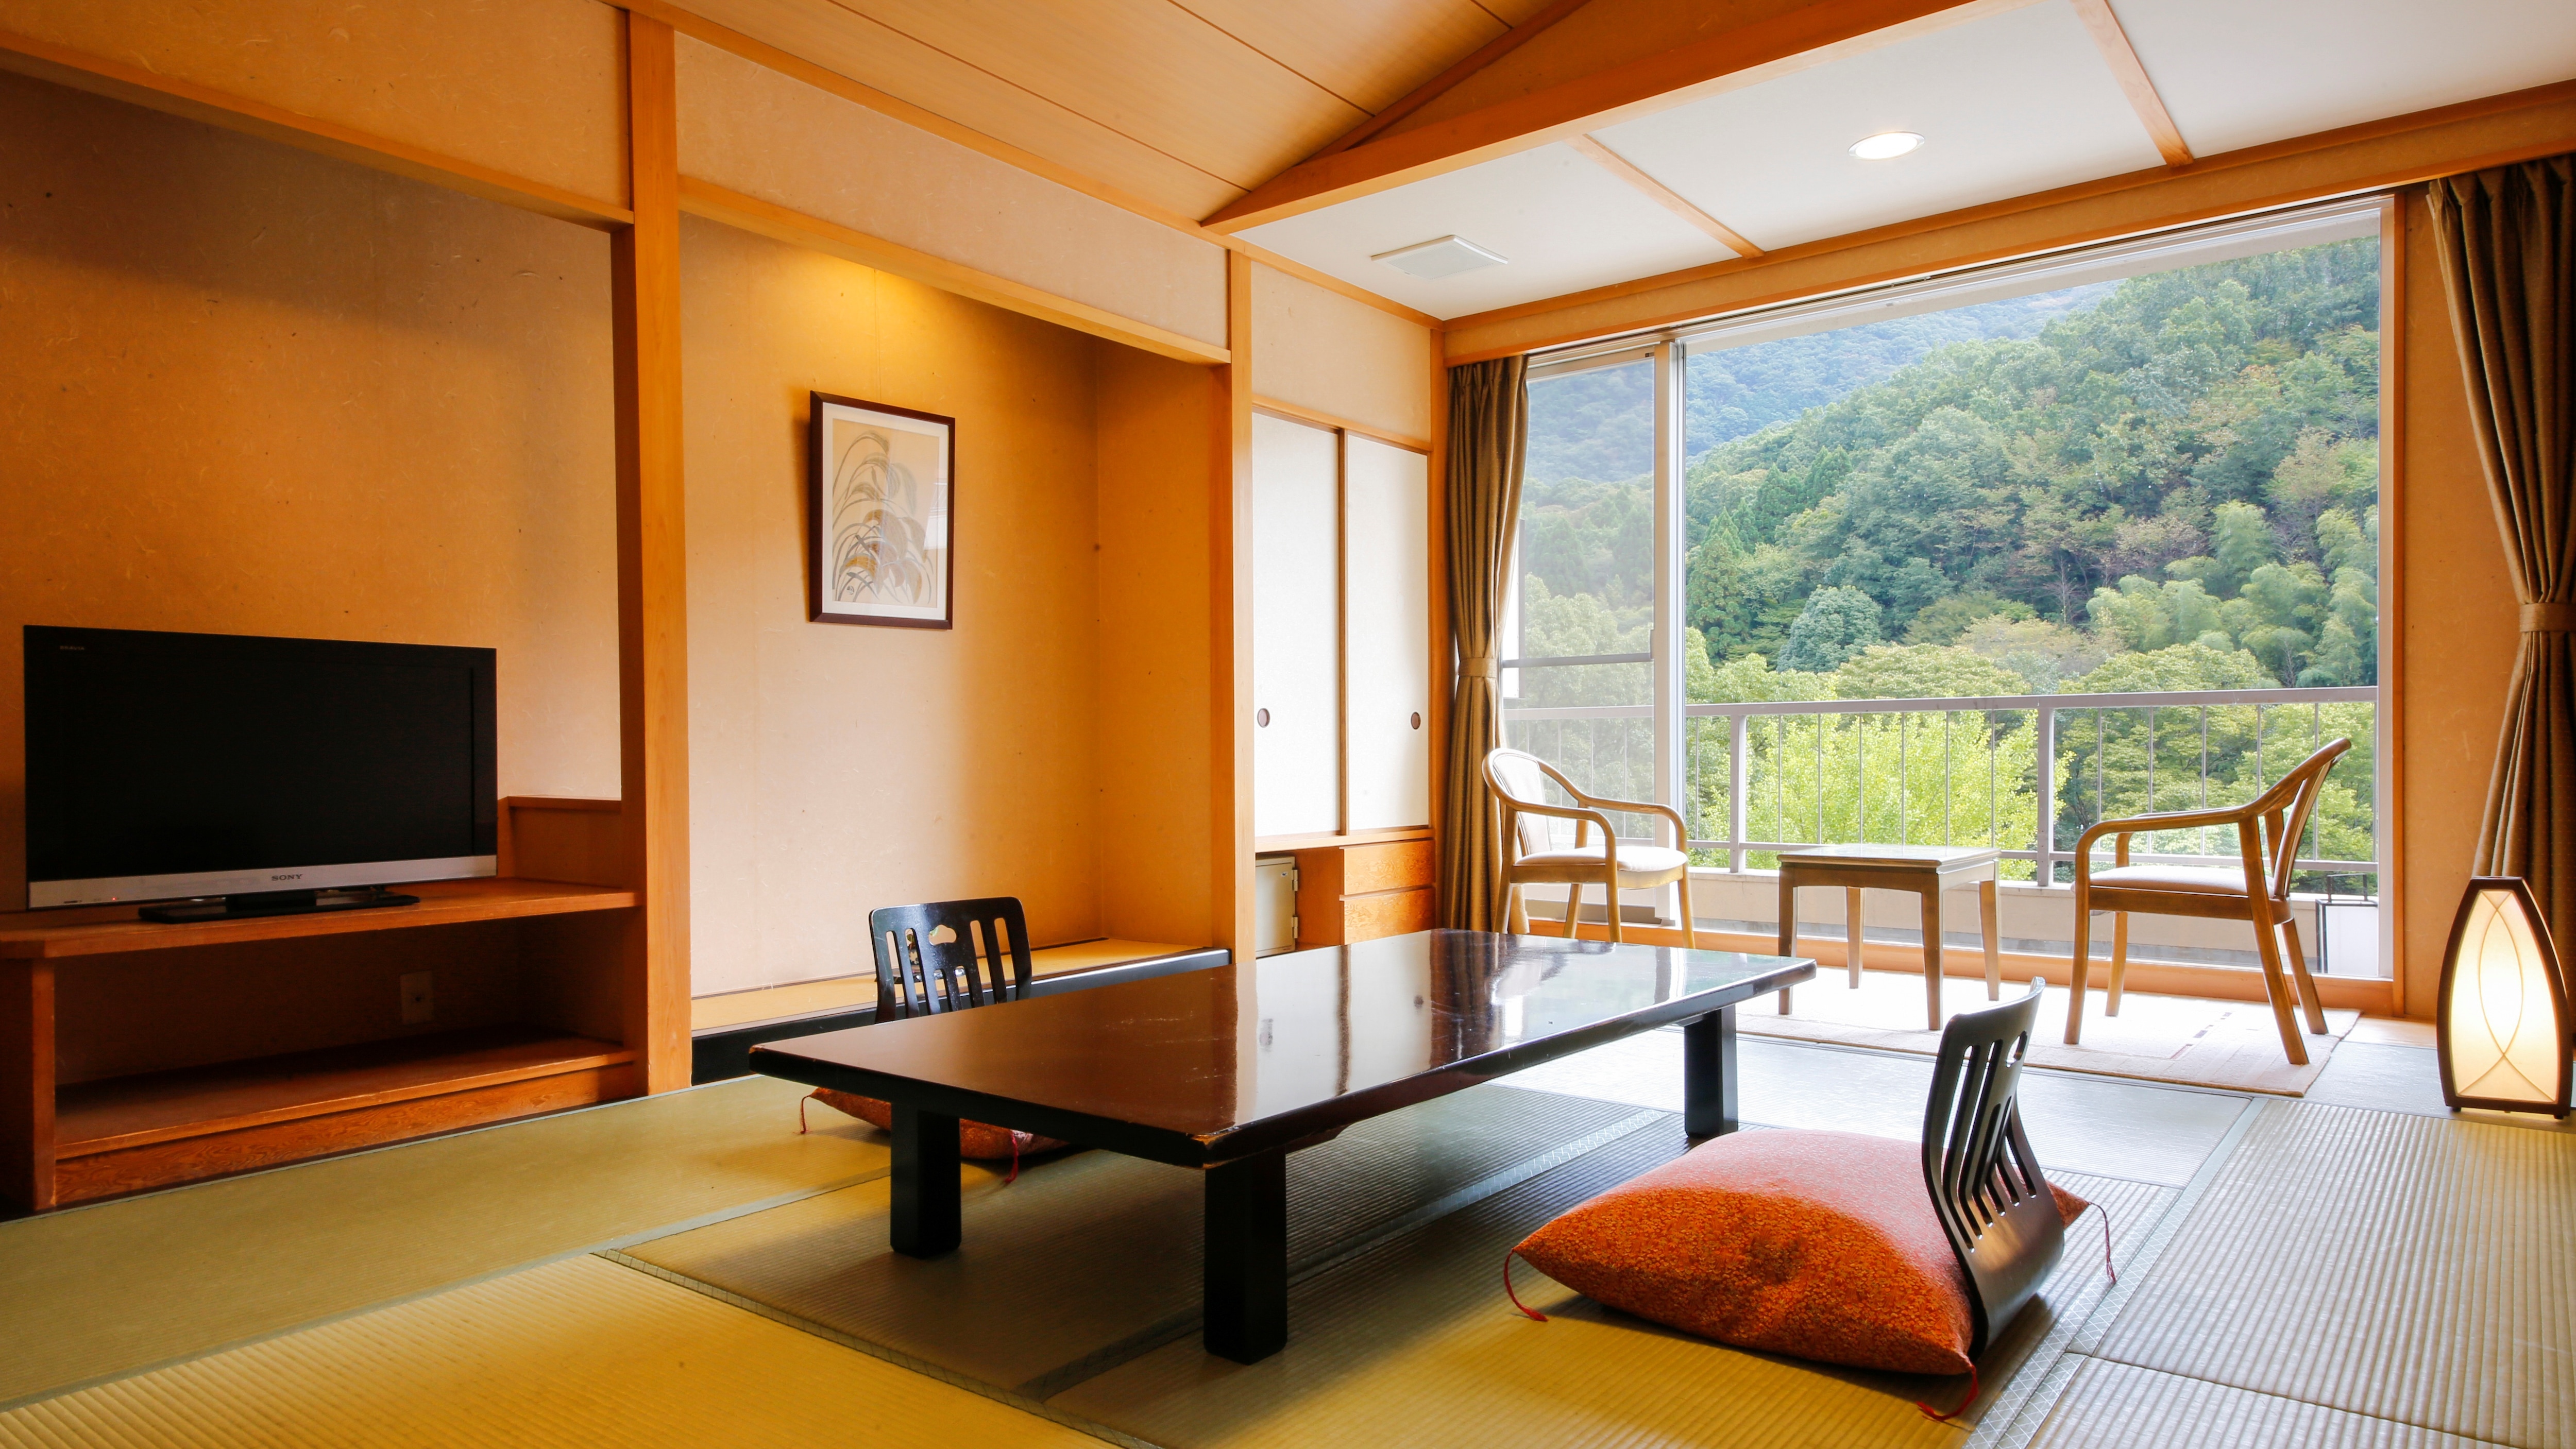 You can see the nature of Satsukiyama from the spacious windows. Please enjoy the scenery that changes with the seasons.